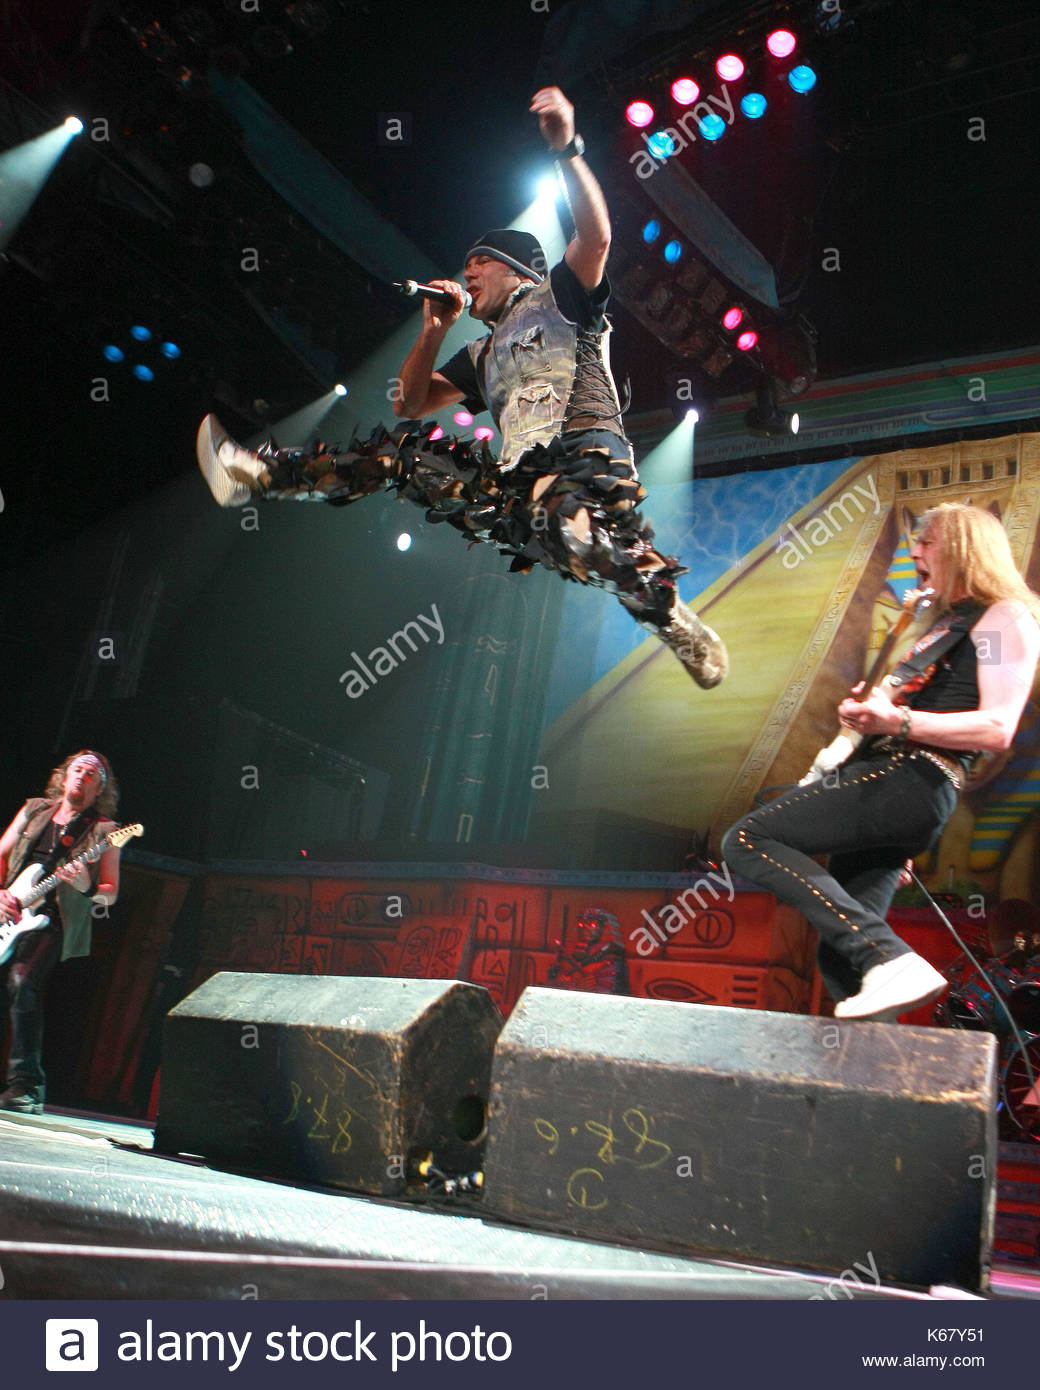 bruce-dickinson-iron-maiden-performs-at-the-bank-atlantic-center-on-K67Y51.jpg